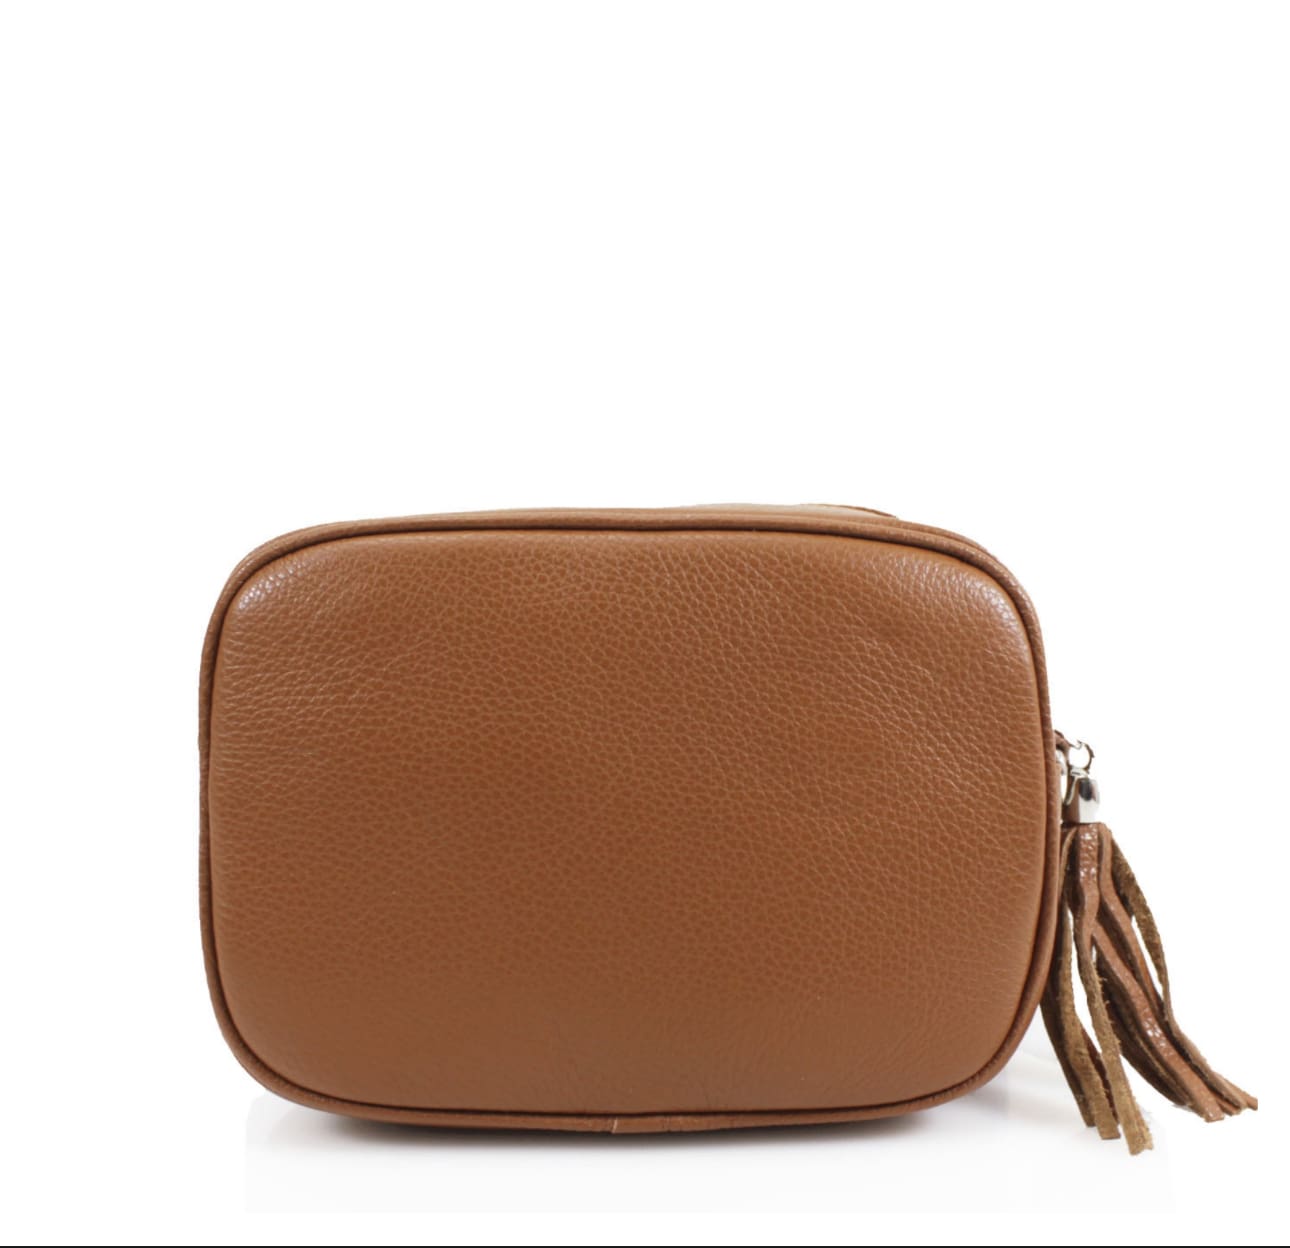 A tan leather bag with a tassel.